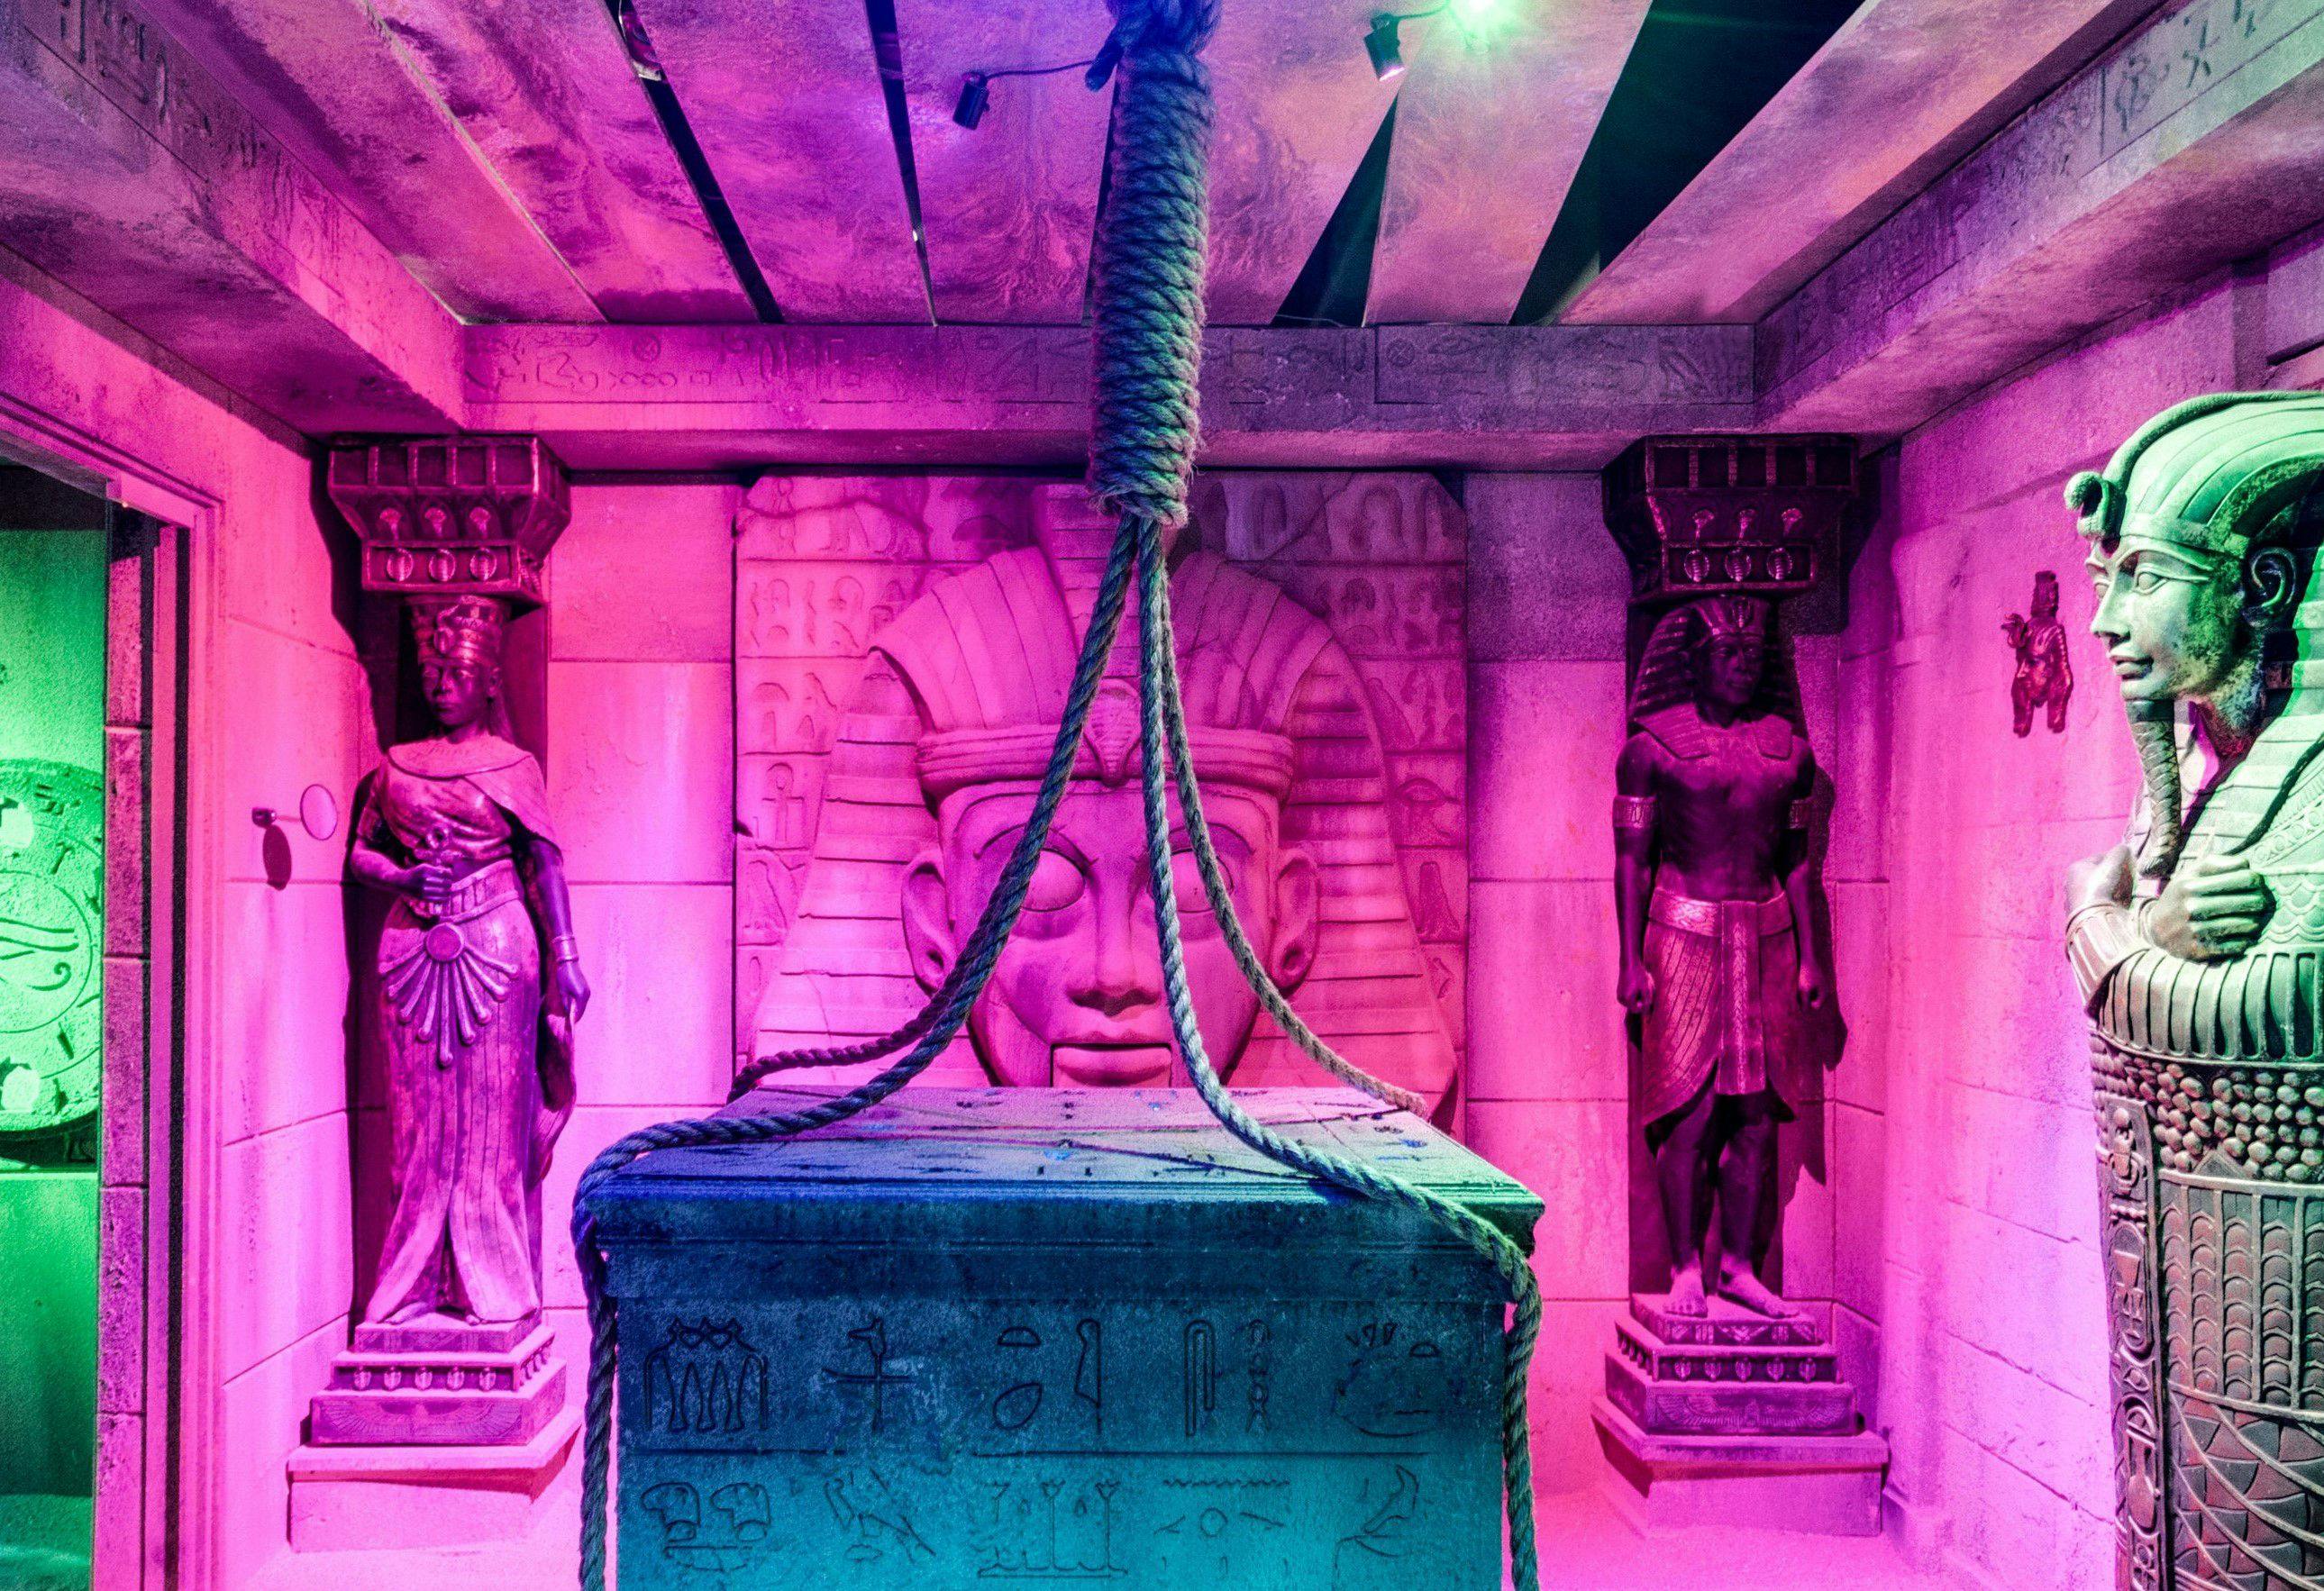 The Curse of the Mummy at The Escape Game